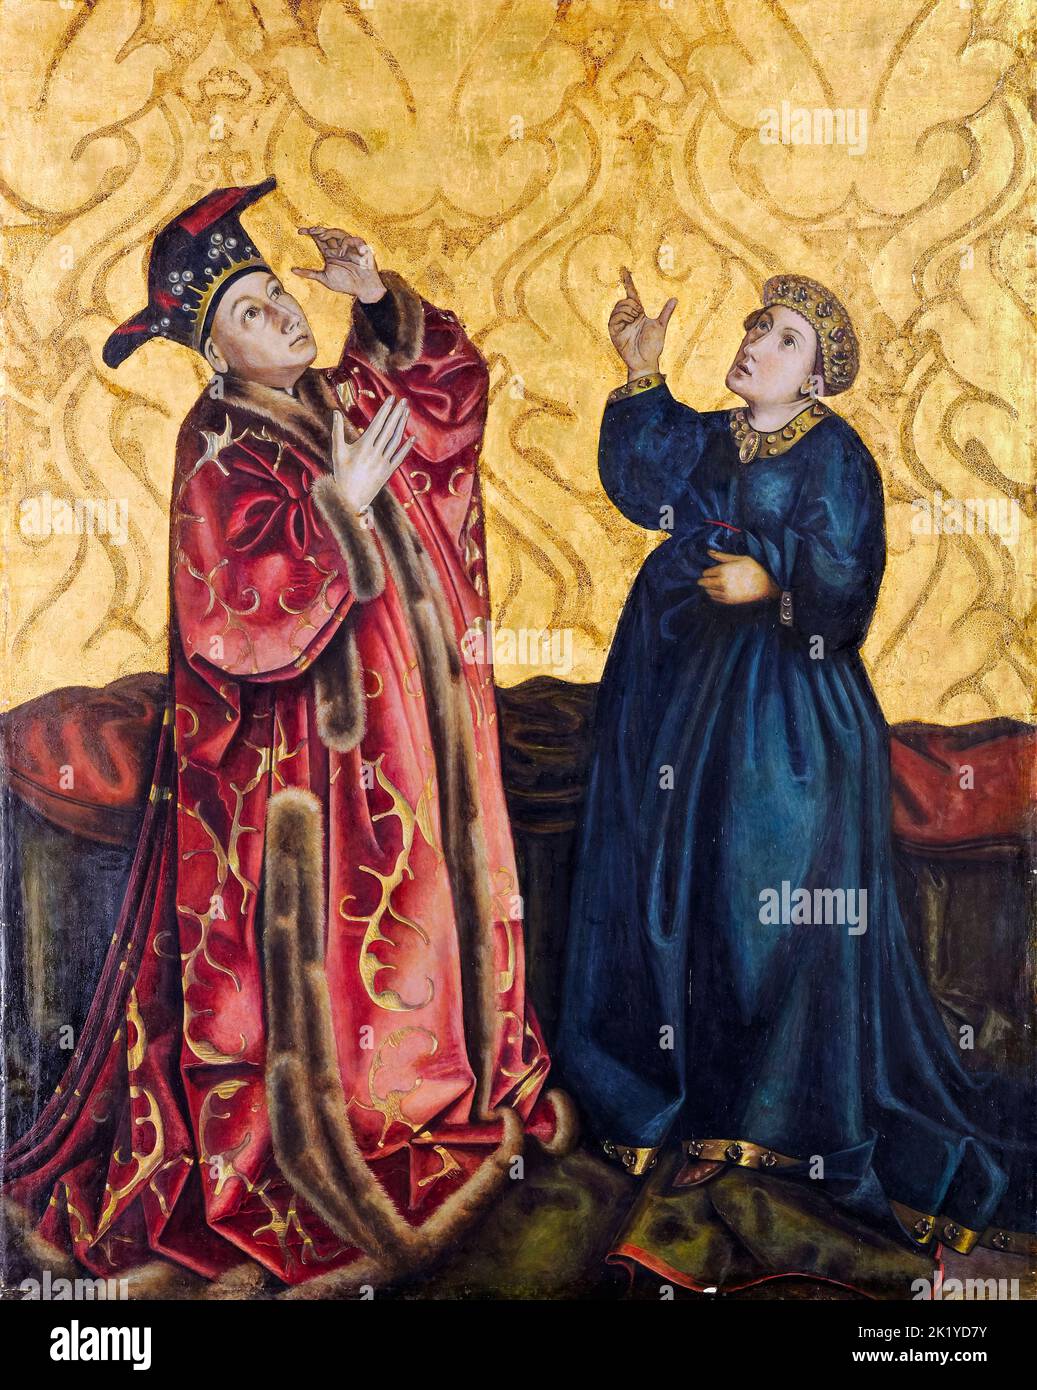 Emperor Augustus And The Tiburtine Sibyl, copy painting in tempera on wood by Gertrud Bock-Schnirlin after Konrad Witz, circa 1933 Stock Photo